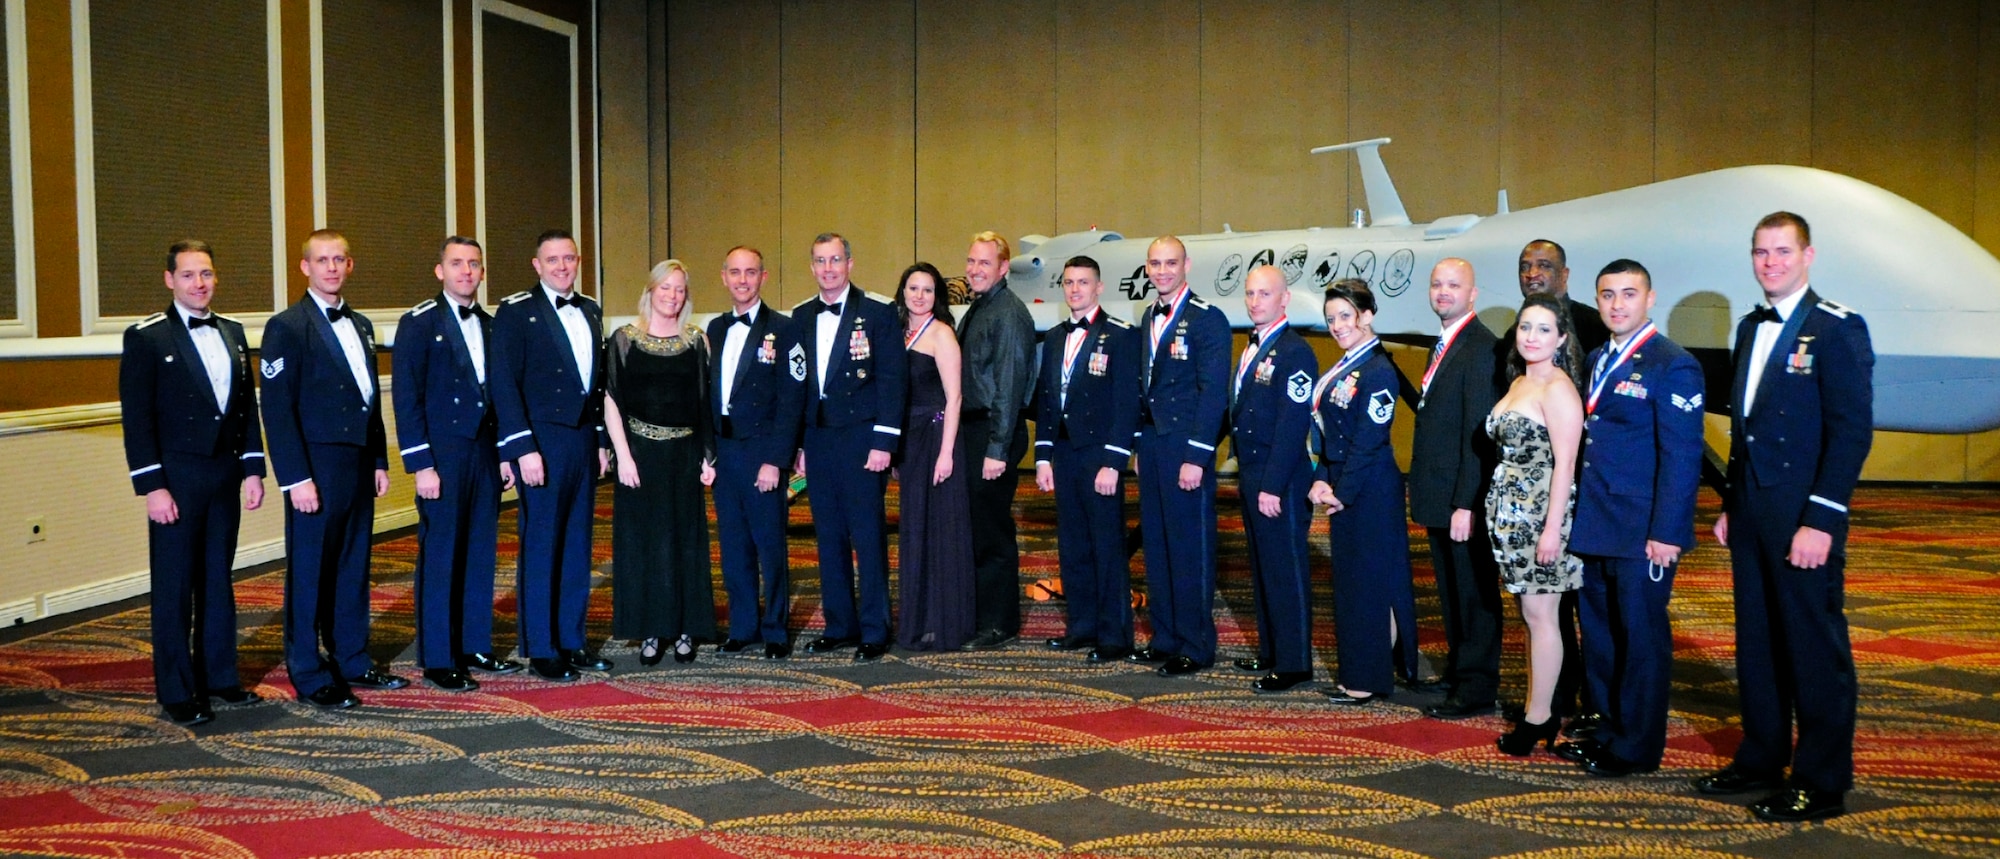 Award nominees pose for a picture with their spouses and co-workers at the 12th Air Force (Air Forces Southern) Outstanding Performer of the Year Banquet in Las Vegas Feb. 23.